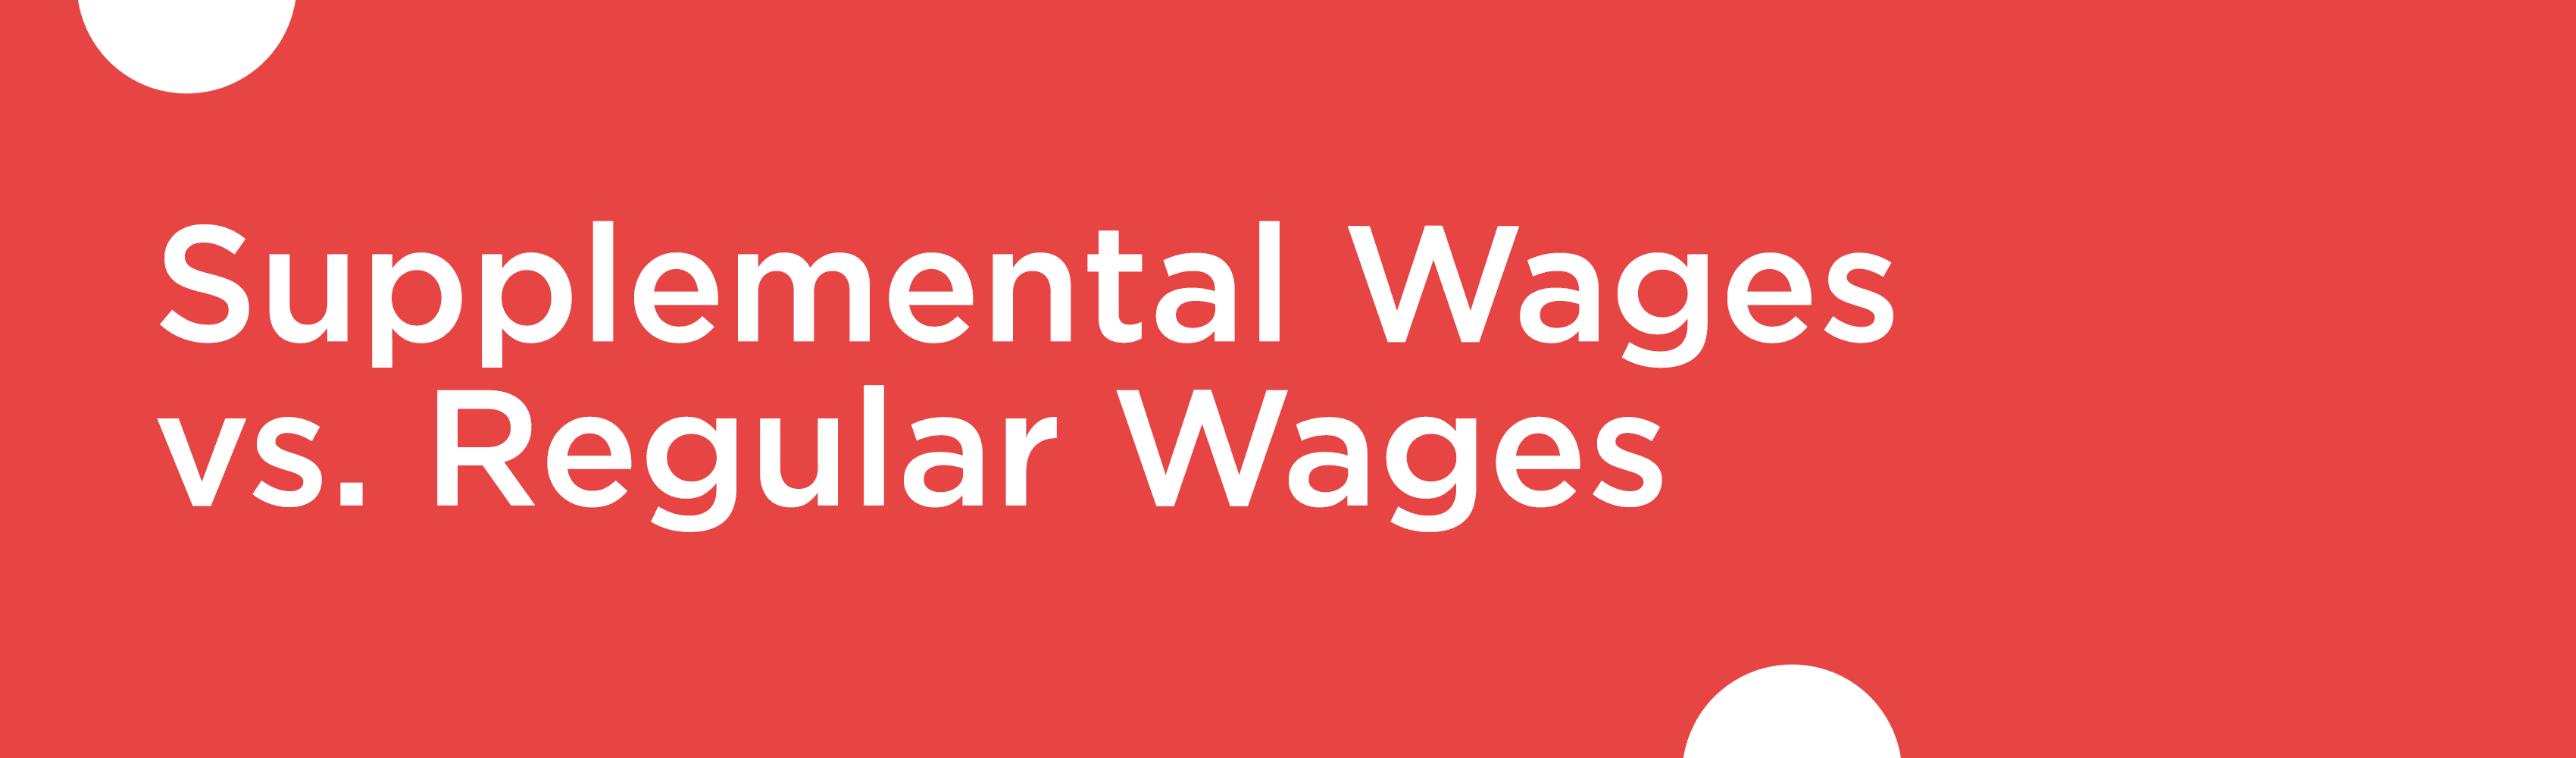 Supplemental Wages vs. Regular Wages: Explained